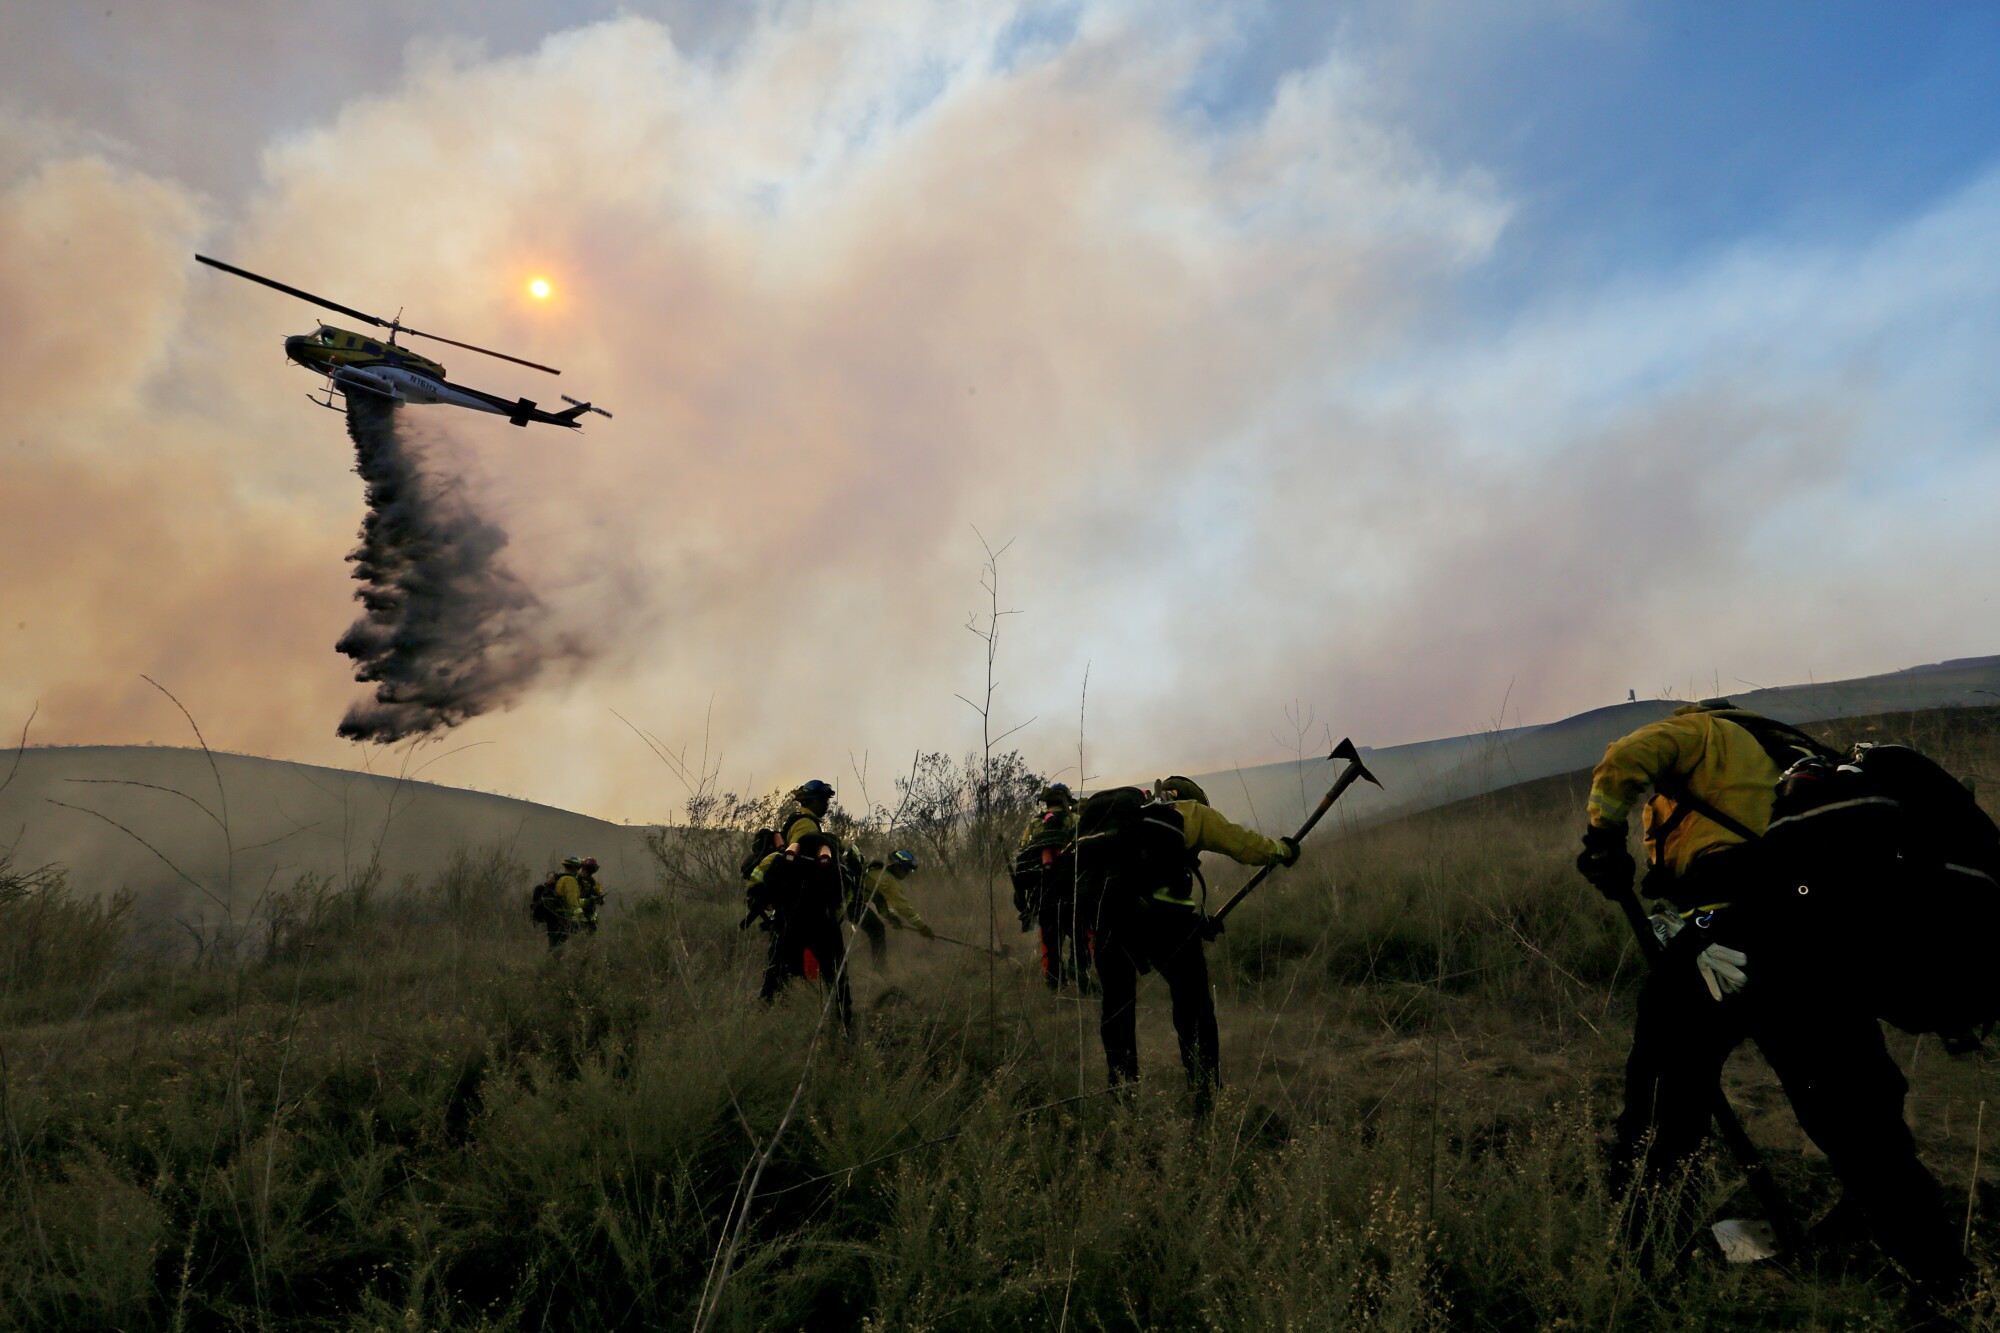 Firefighters use hand tools to cut a line in brush as a helicopter dumps water nearby